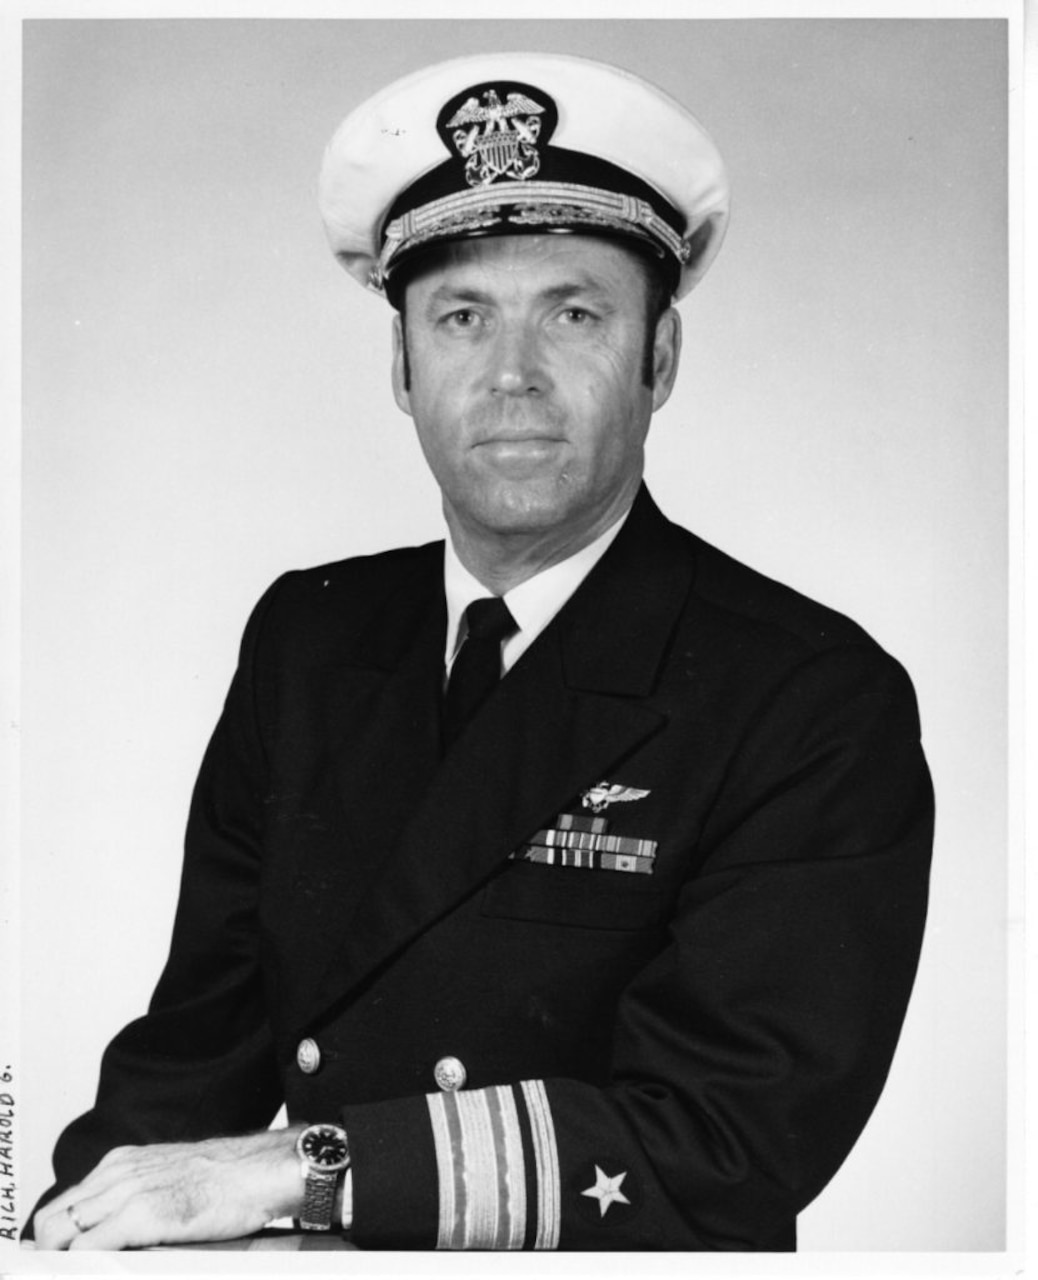 Passing of Rear Adm. Harold G. Rich, USN (Ret.) > The Sextant